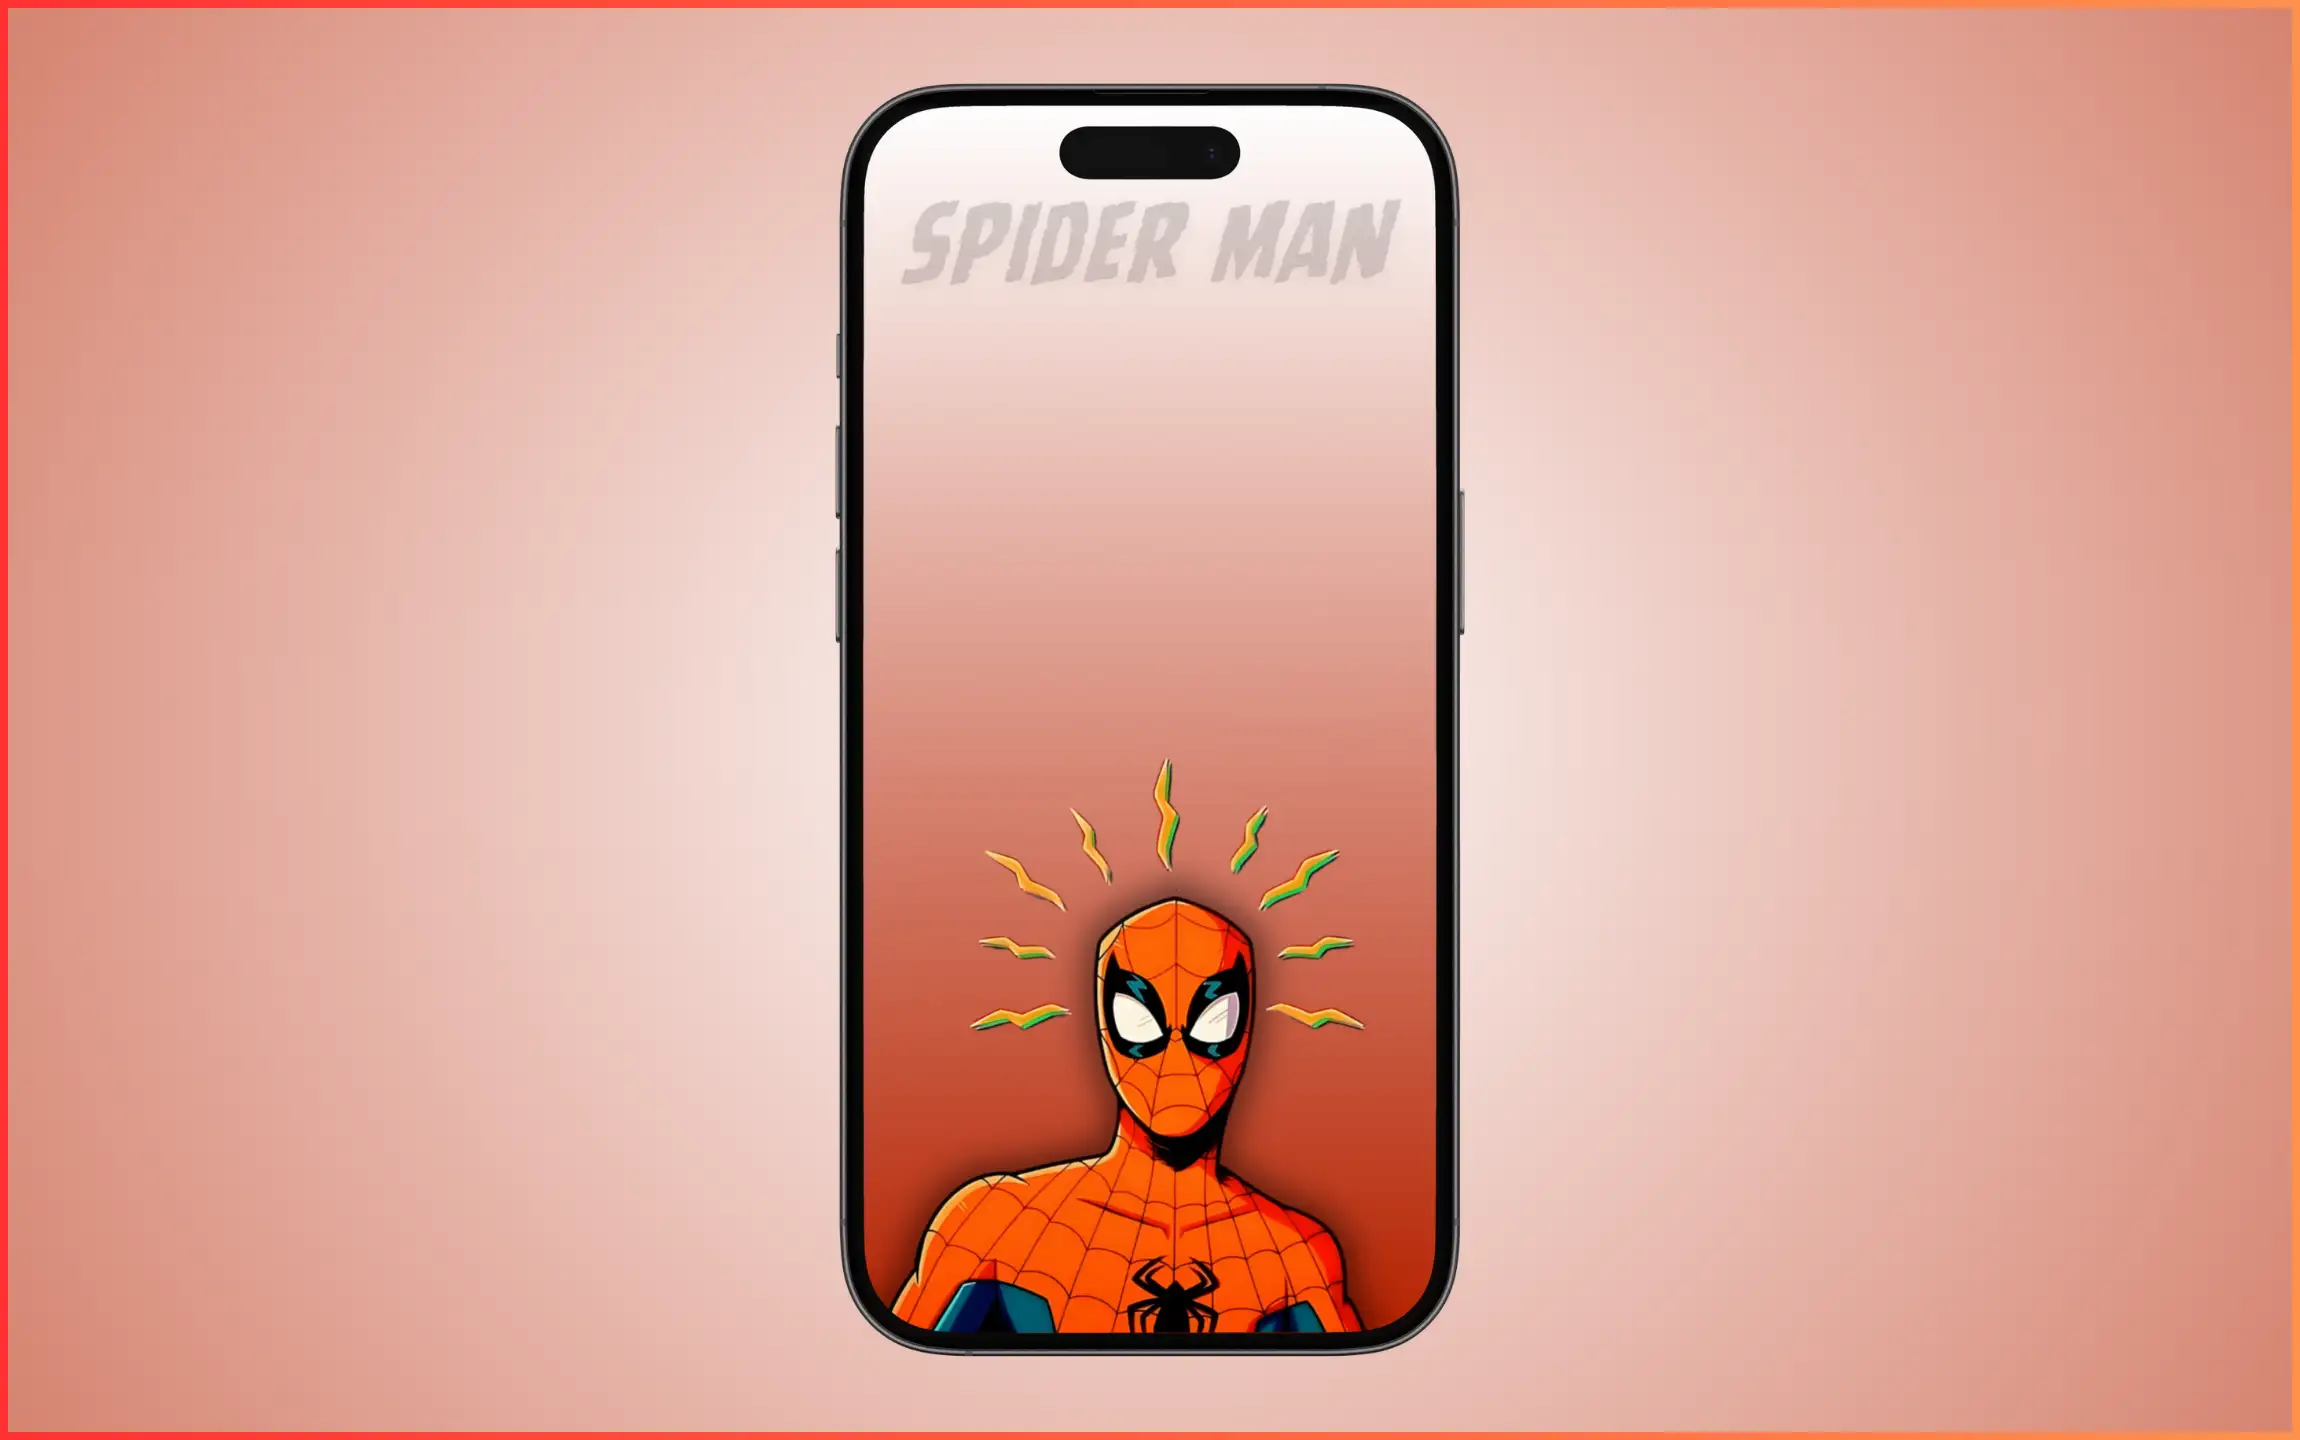 Marvel Confused Spider-Man art wallpaper for iPhone